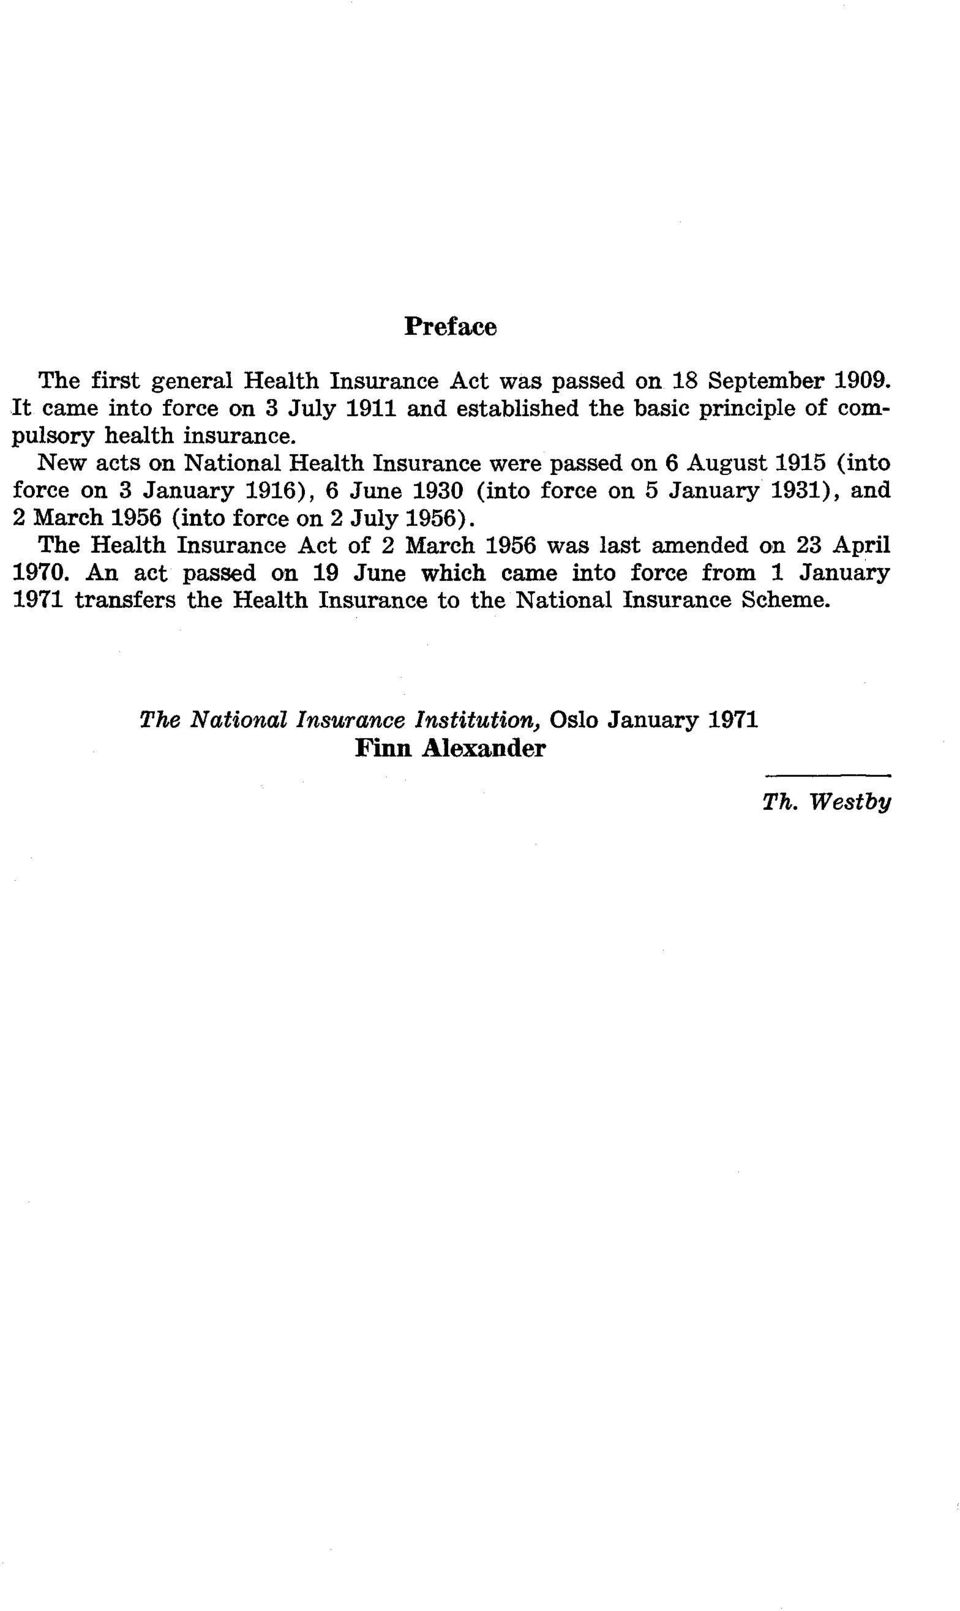 New acts on National Health Insurance were passed on 6 August 1915 (into force on 3 January 1916), 6 June 1930 (into force on 5 January 1931), and 2 March 1956